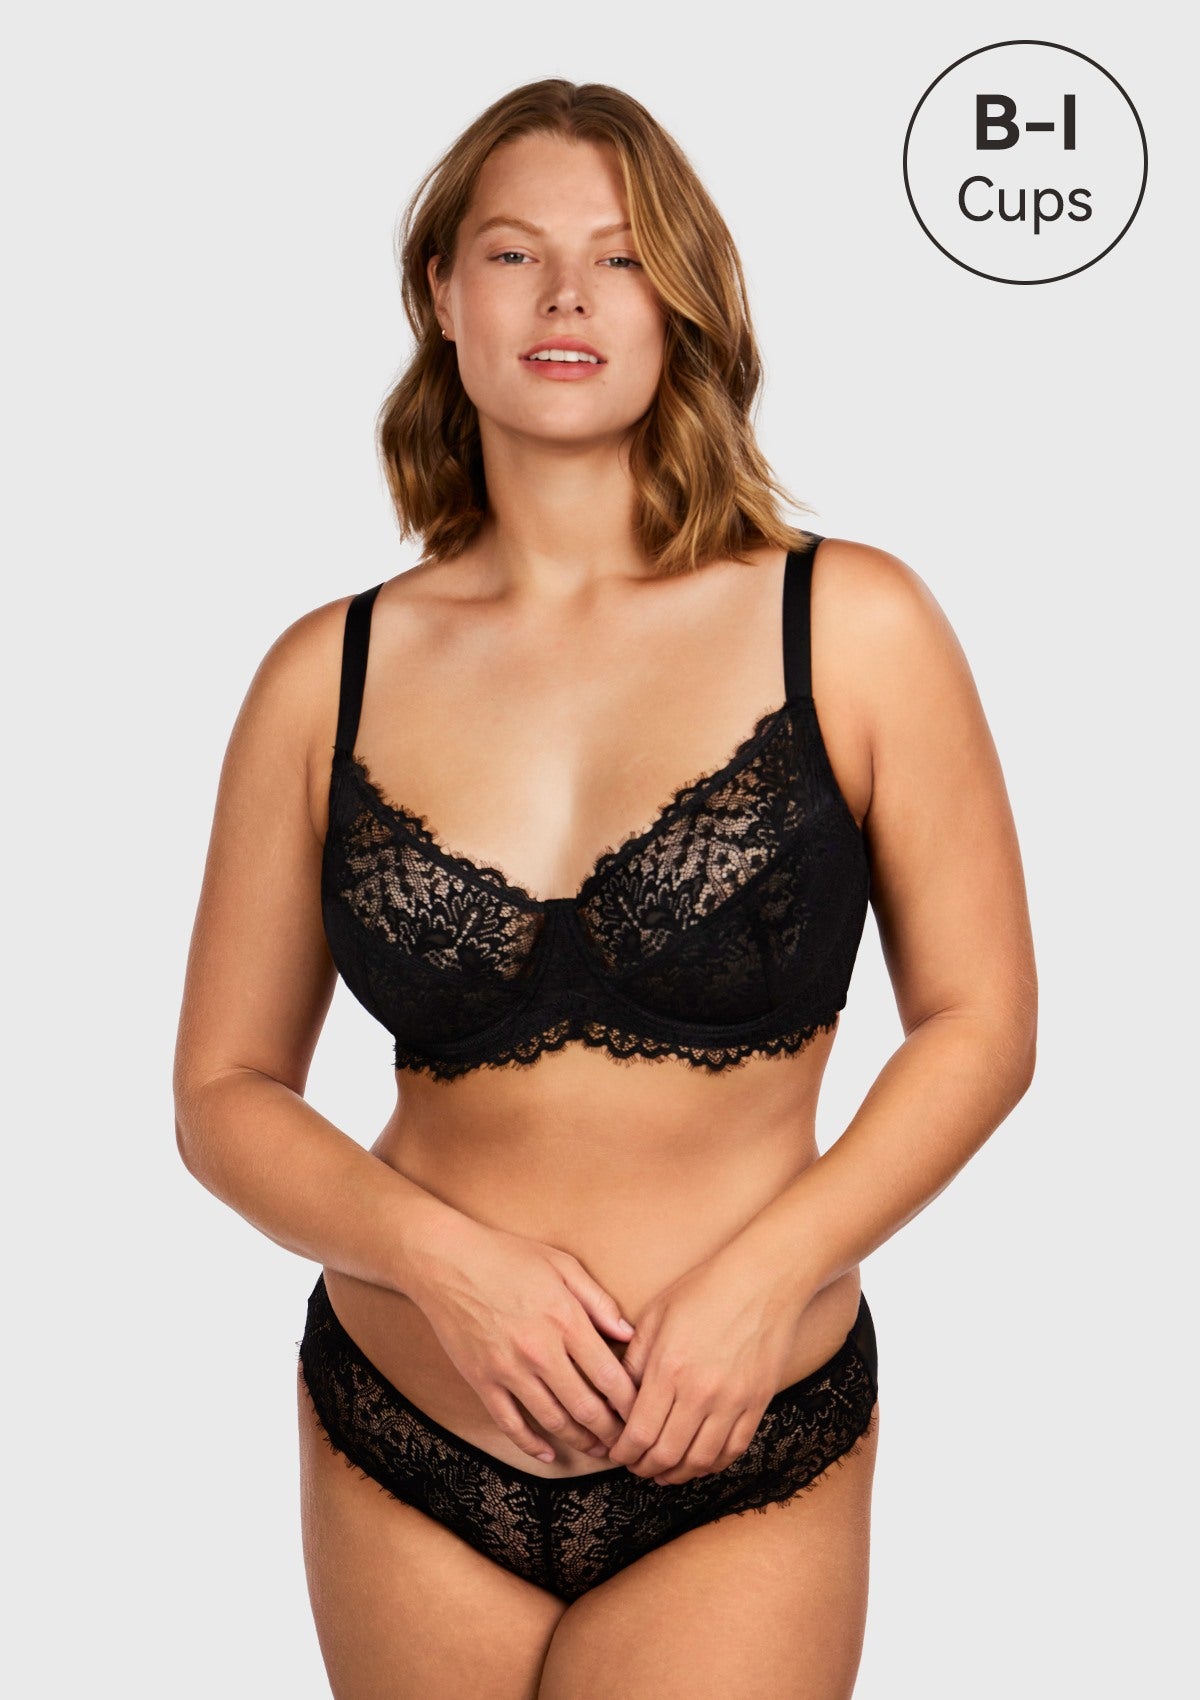 HSIA Sunflower Underwire Lace Bra: Unlined Full Coverage Support Bra - Black / 38 / D